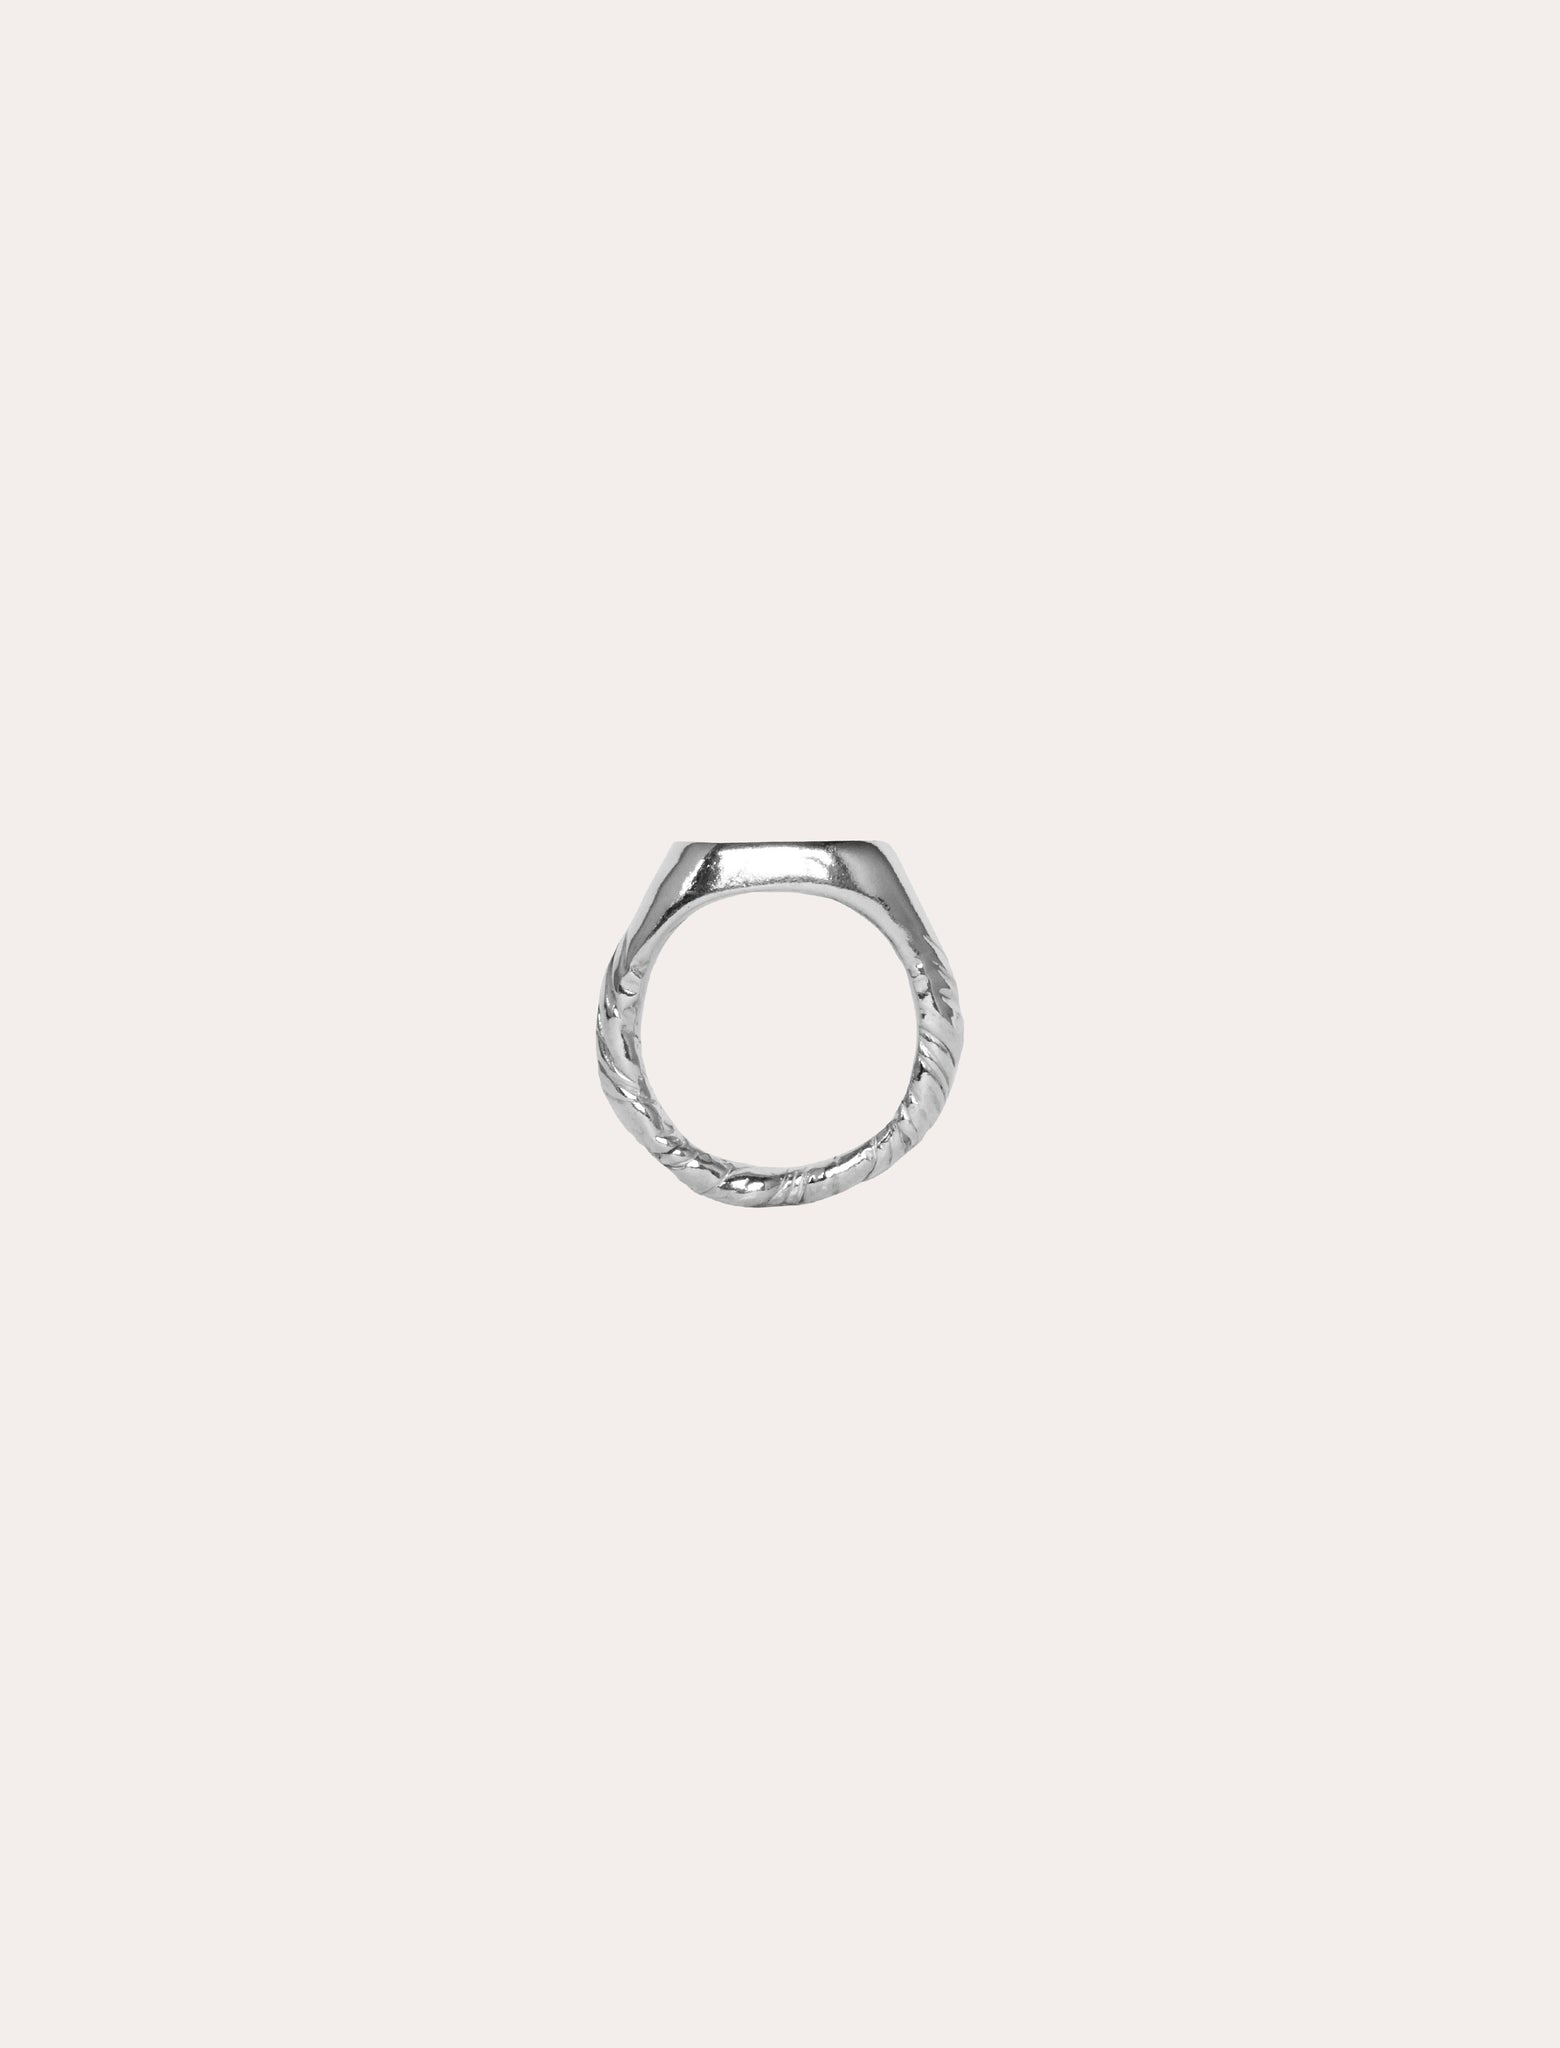 ANOTHER ASPECT x Corali, Koyubi Ring Sterling Silver